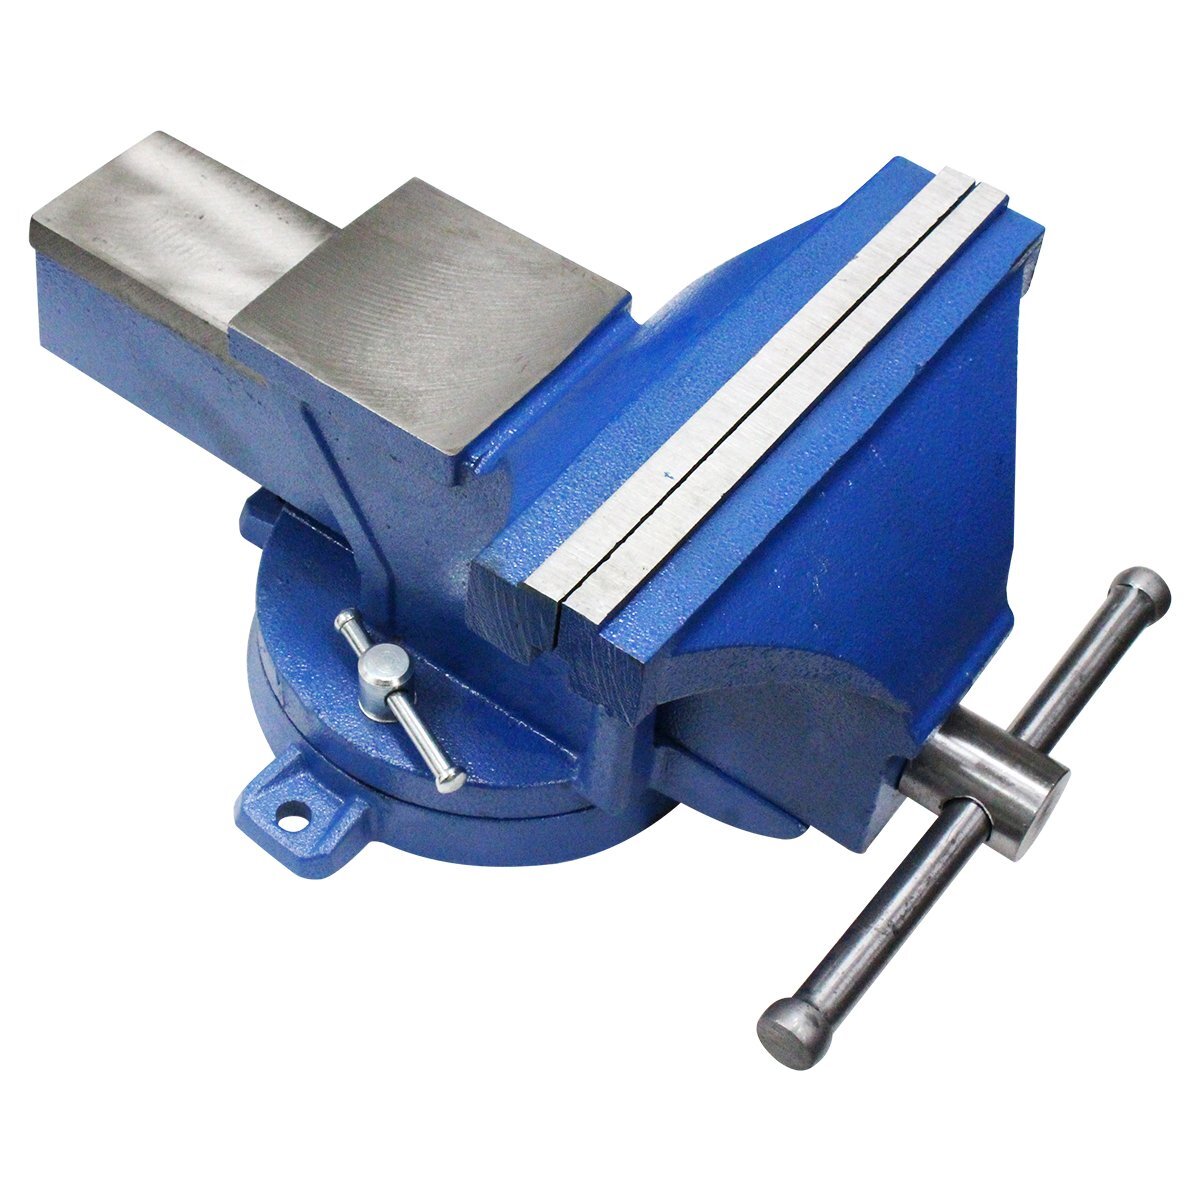 [ new goods immediate payment ] vise vise 360 times rotary desk . width 200mm maximum opening 165mm Lead bench 3 point stop working bench welding ironworking fixation tightening tool table 